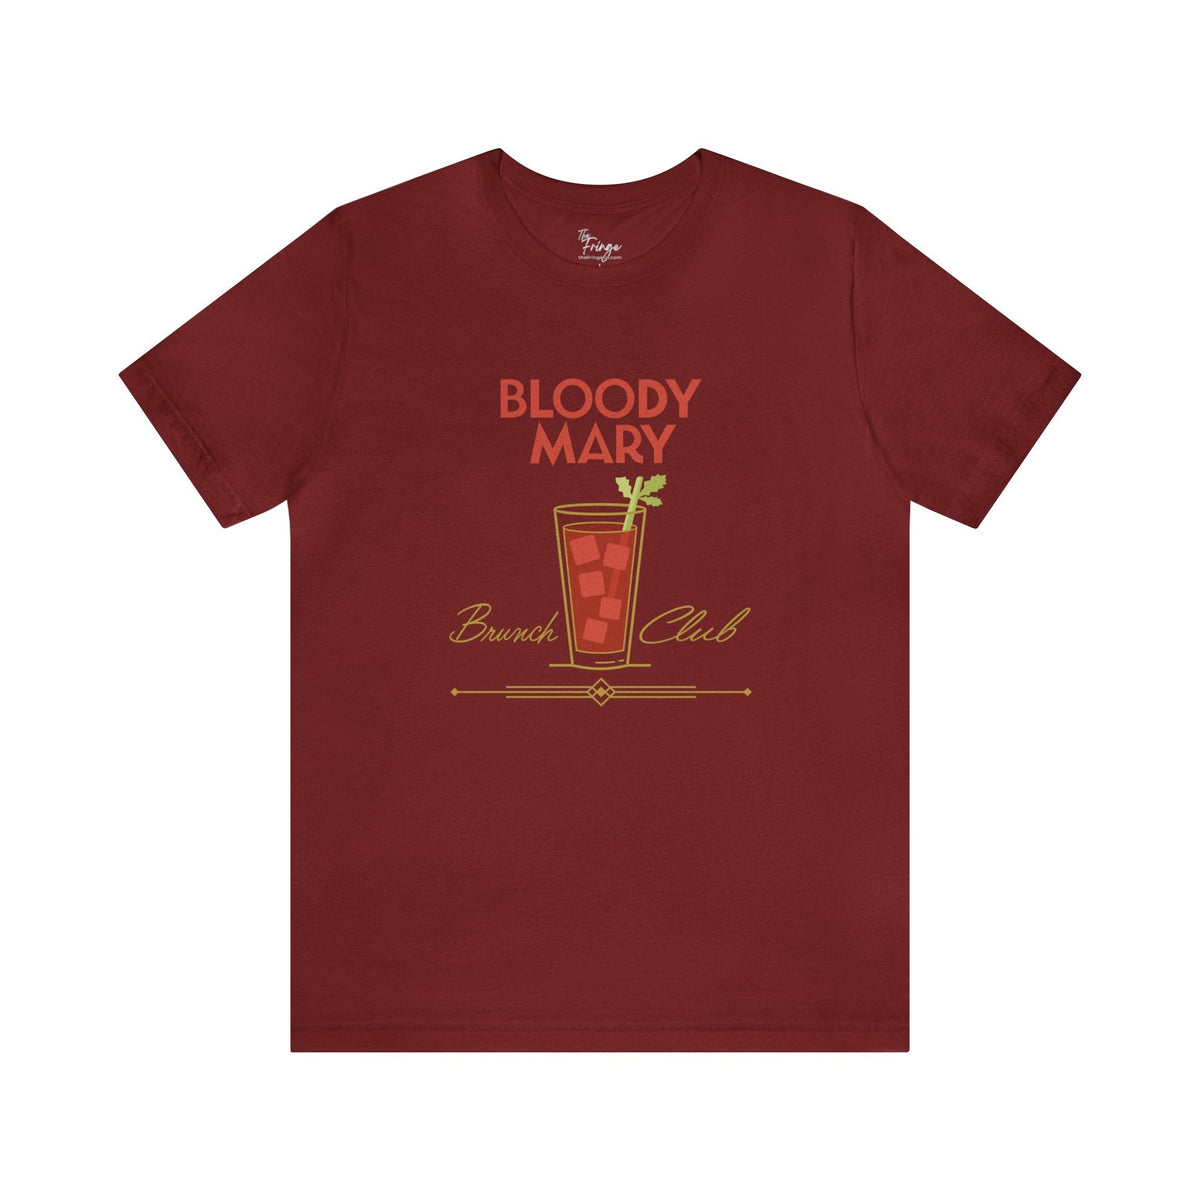 Bloody Mary Brunch Club Graphic Tee | Girls Day | Bottomless Bloody Marys | Brunching so hard T-Shirt TheFringeCultureCollective